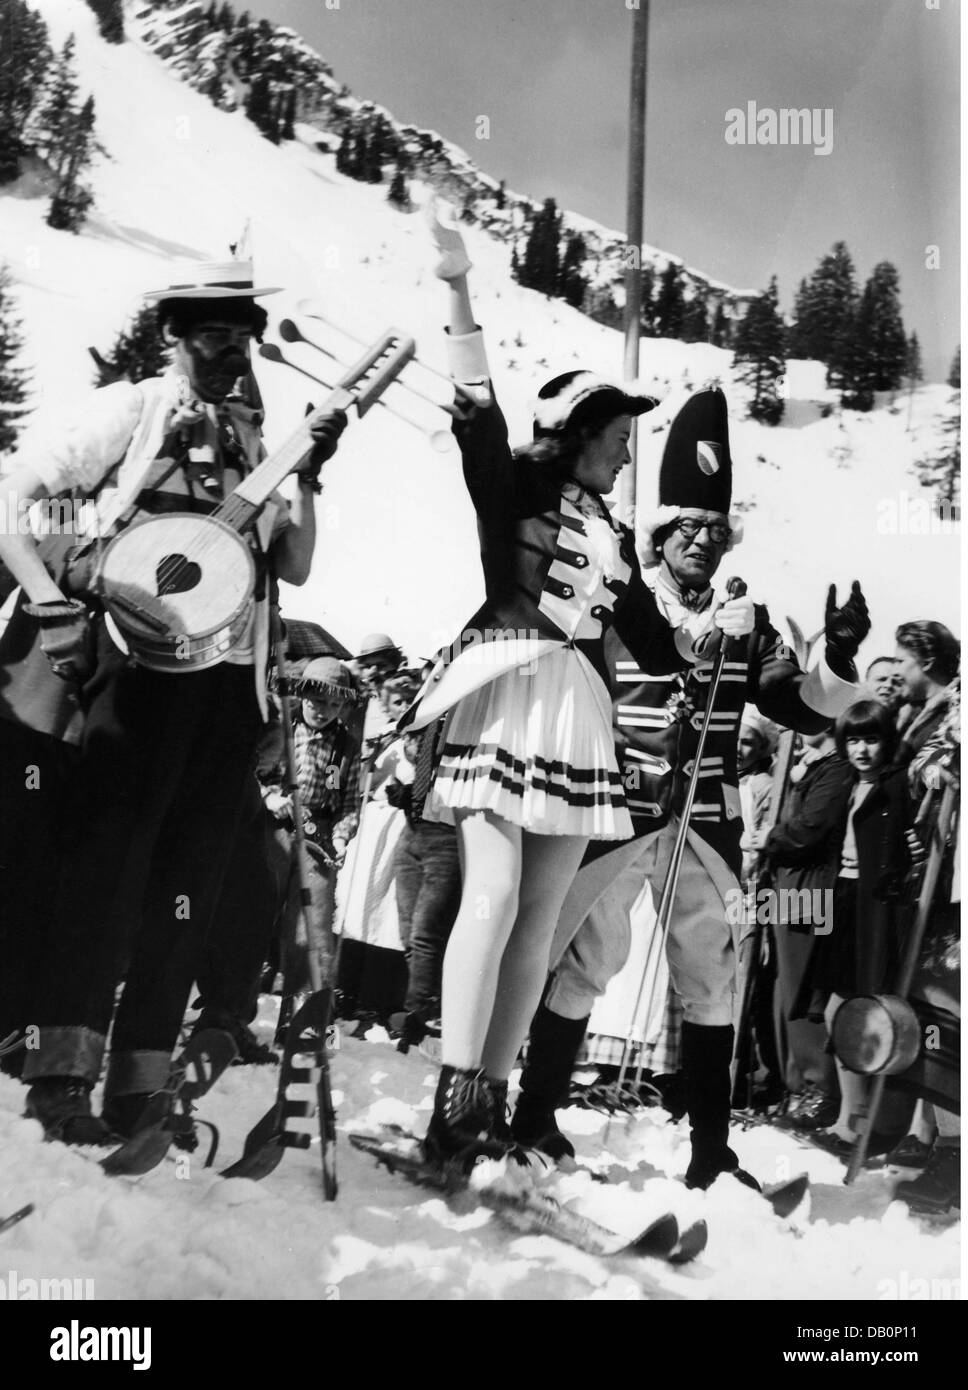 festivities, carnival, carnival on skis, skiers wearing costumes of the Cologne Carnival, Firstalm, Schliersee, 1957, Additional-Rights-Clearences-Not Available Stock Photo